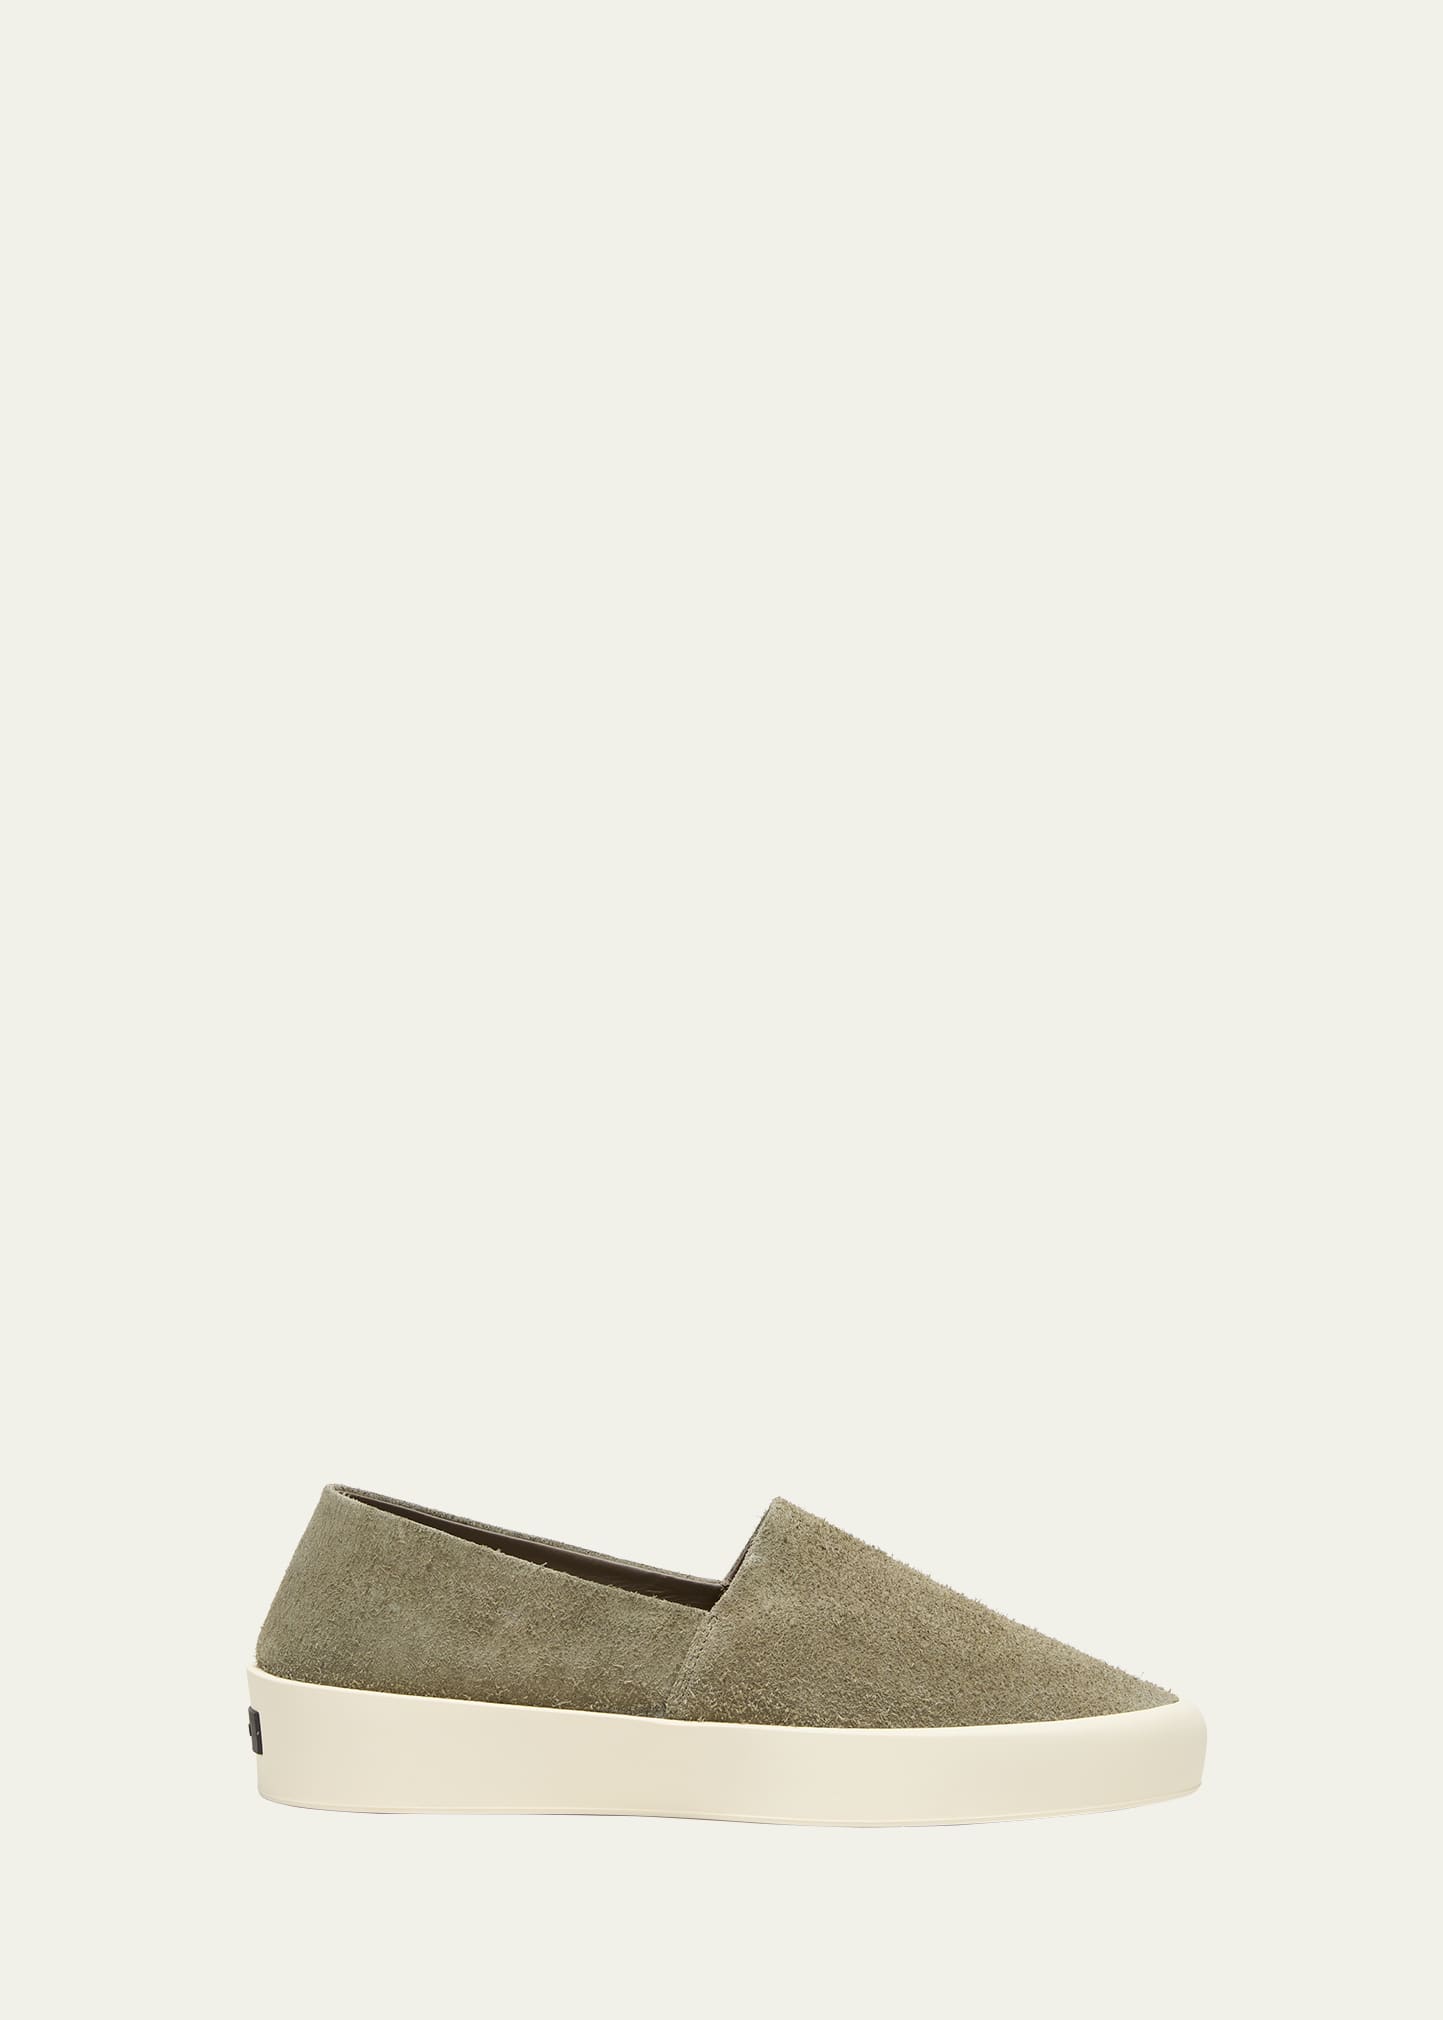 Fear Of God Men's Hairy Suede Espadrilles In Wolf